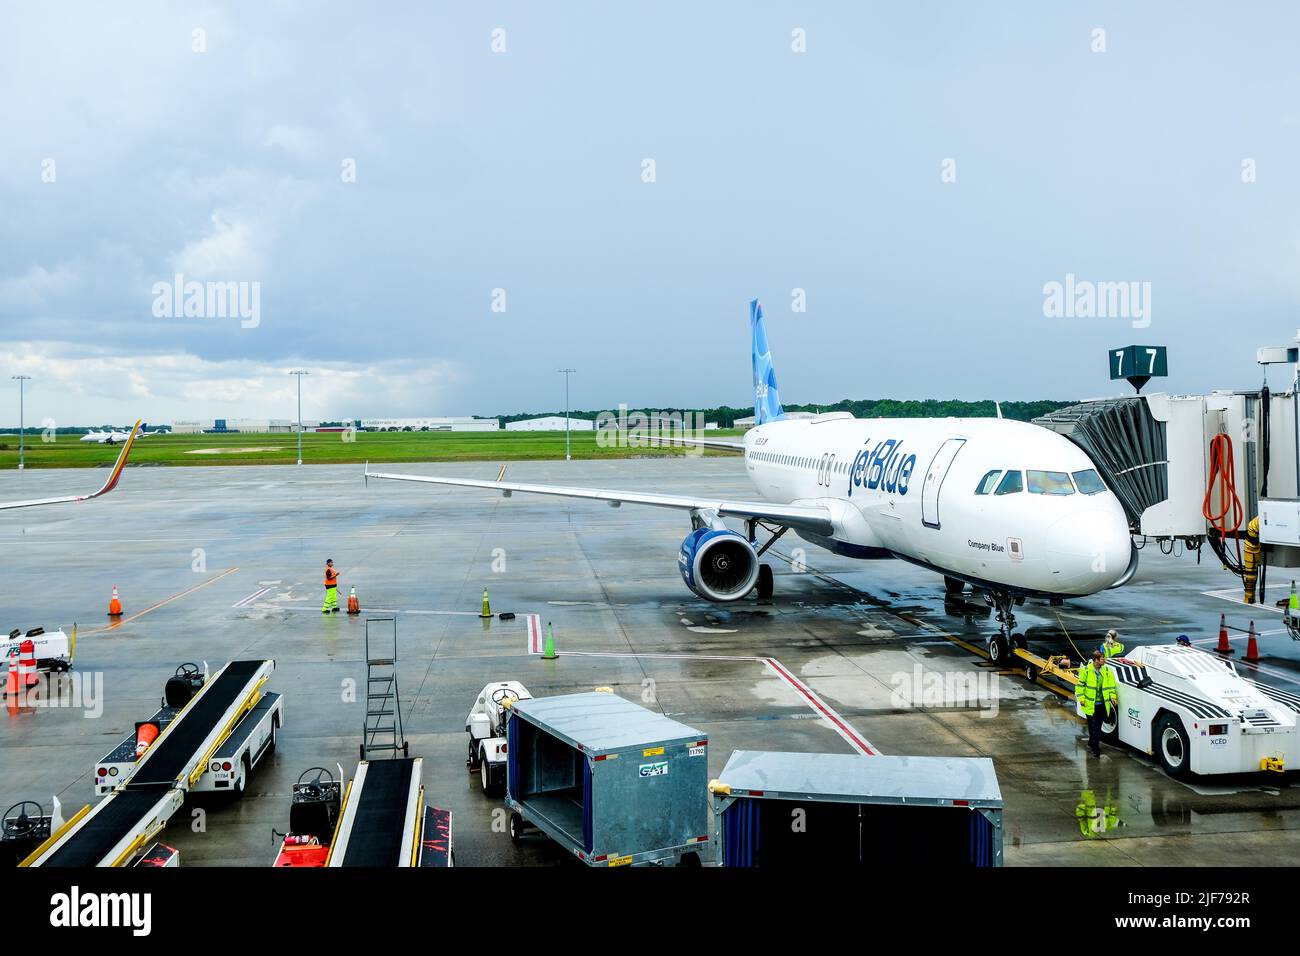 Flight cancellations stress weary travelers. Stock images of current flight delays around the USA. Disrupted travel plans. JetBlue plane on runway. Stock Photo